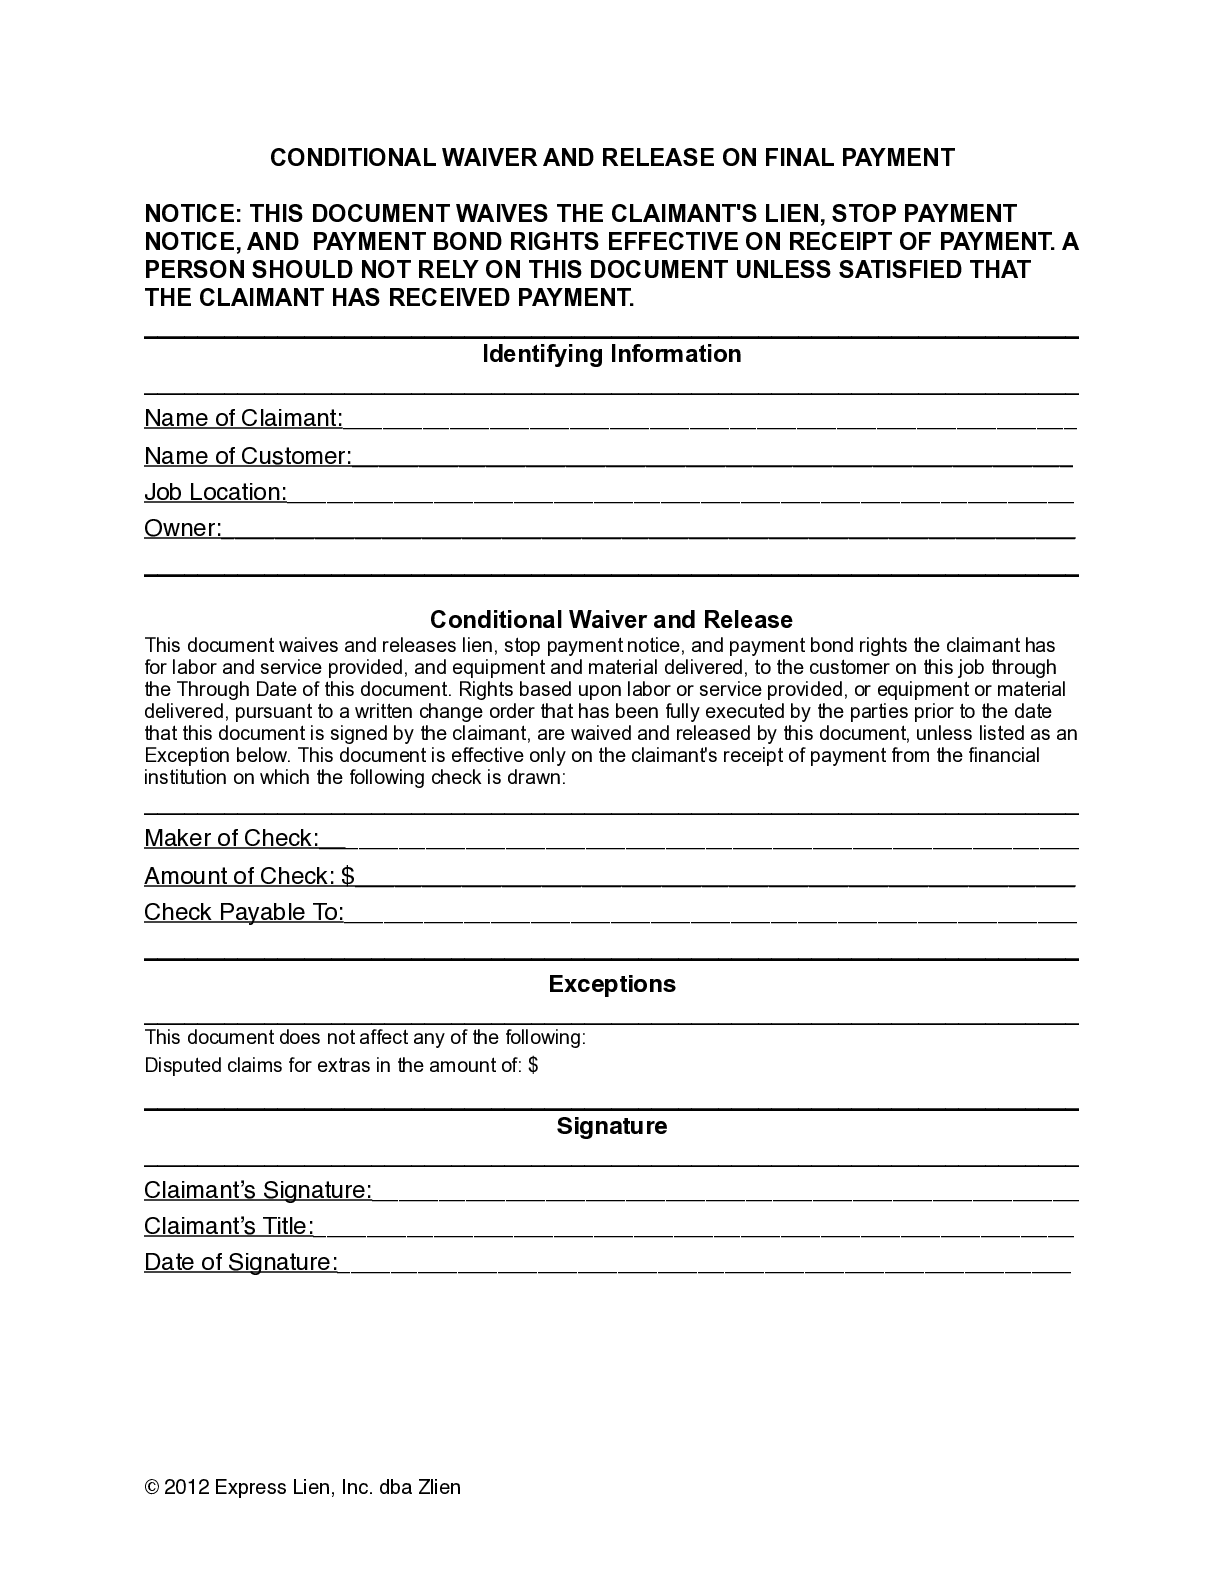 Hawaii Lien Waiver FAQs, Guide, Forms, & Resources